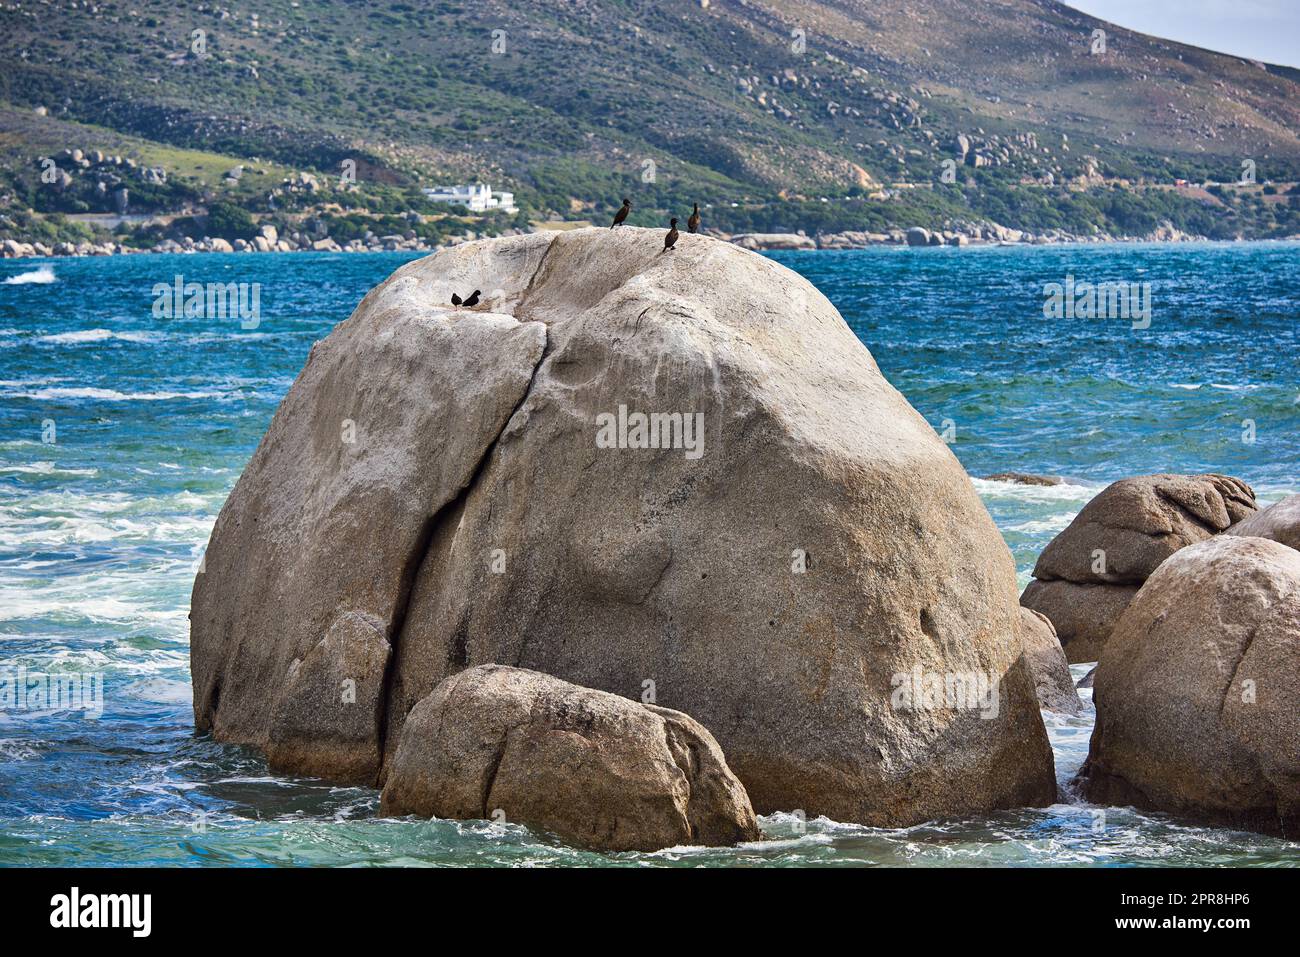 Big rocks in the blue ocean with mountains in the background. Stunning nature landscape or seascape on a summer day. Boulders or large natural stones in aqua sea water with beautiful rough textures Stock Photo